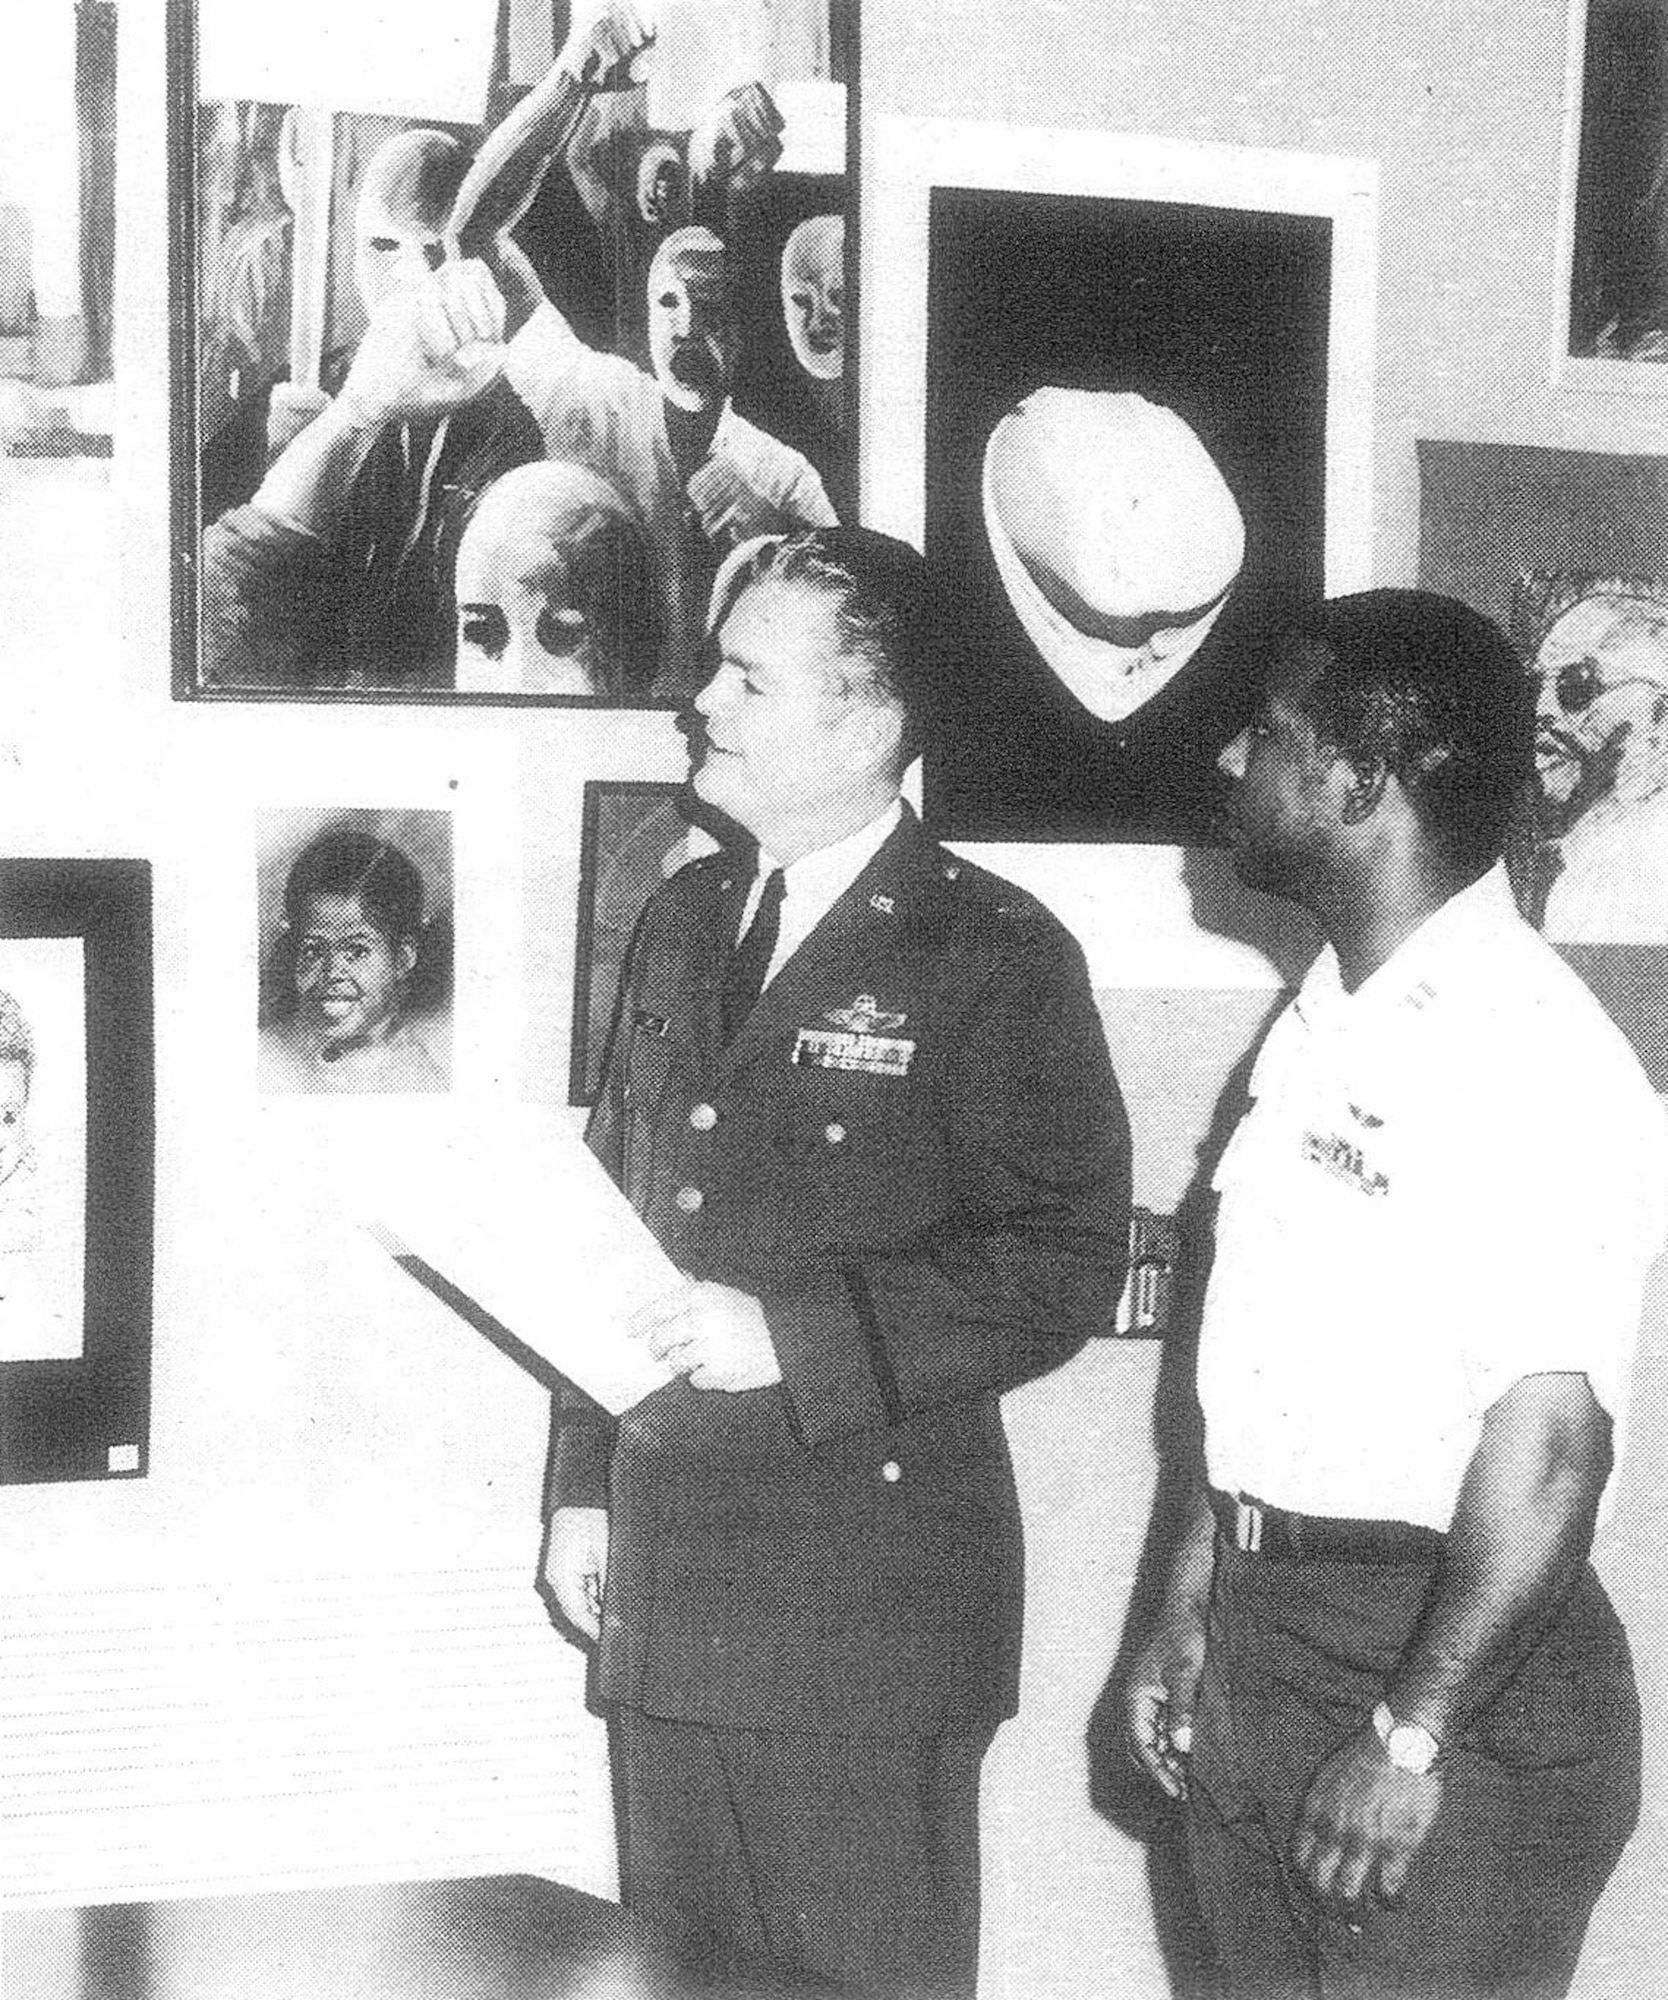 Col H.R. Jewell, 2nd Bomb Wing CV, left, and Capt Maurice Harris, EEO officer, at the Black Art Exhibit displayed at the Barksdale Library during “Black History Week”, Barksdale Air Force Base, La., 1972.